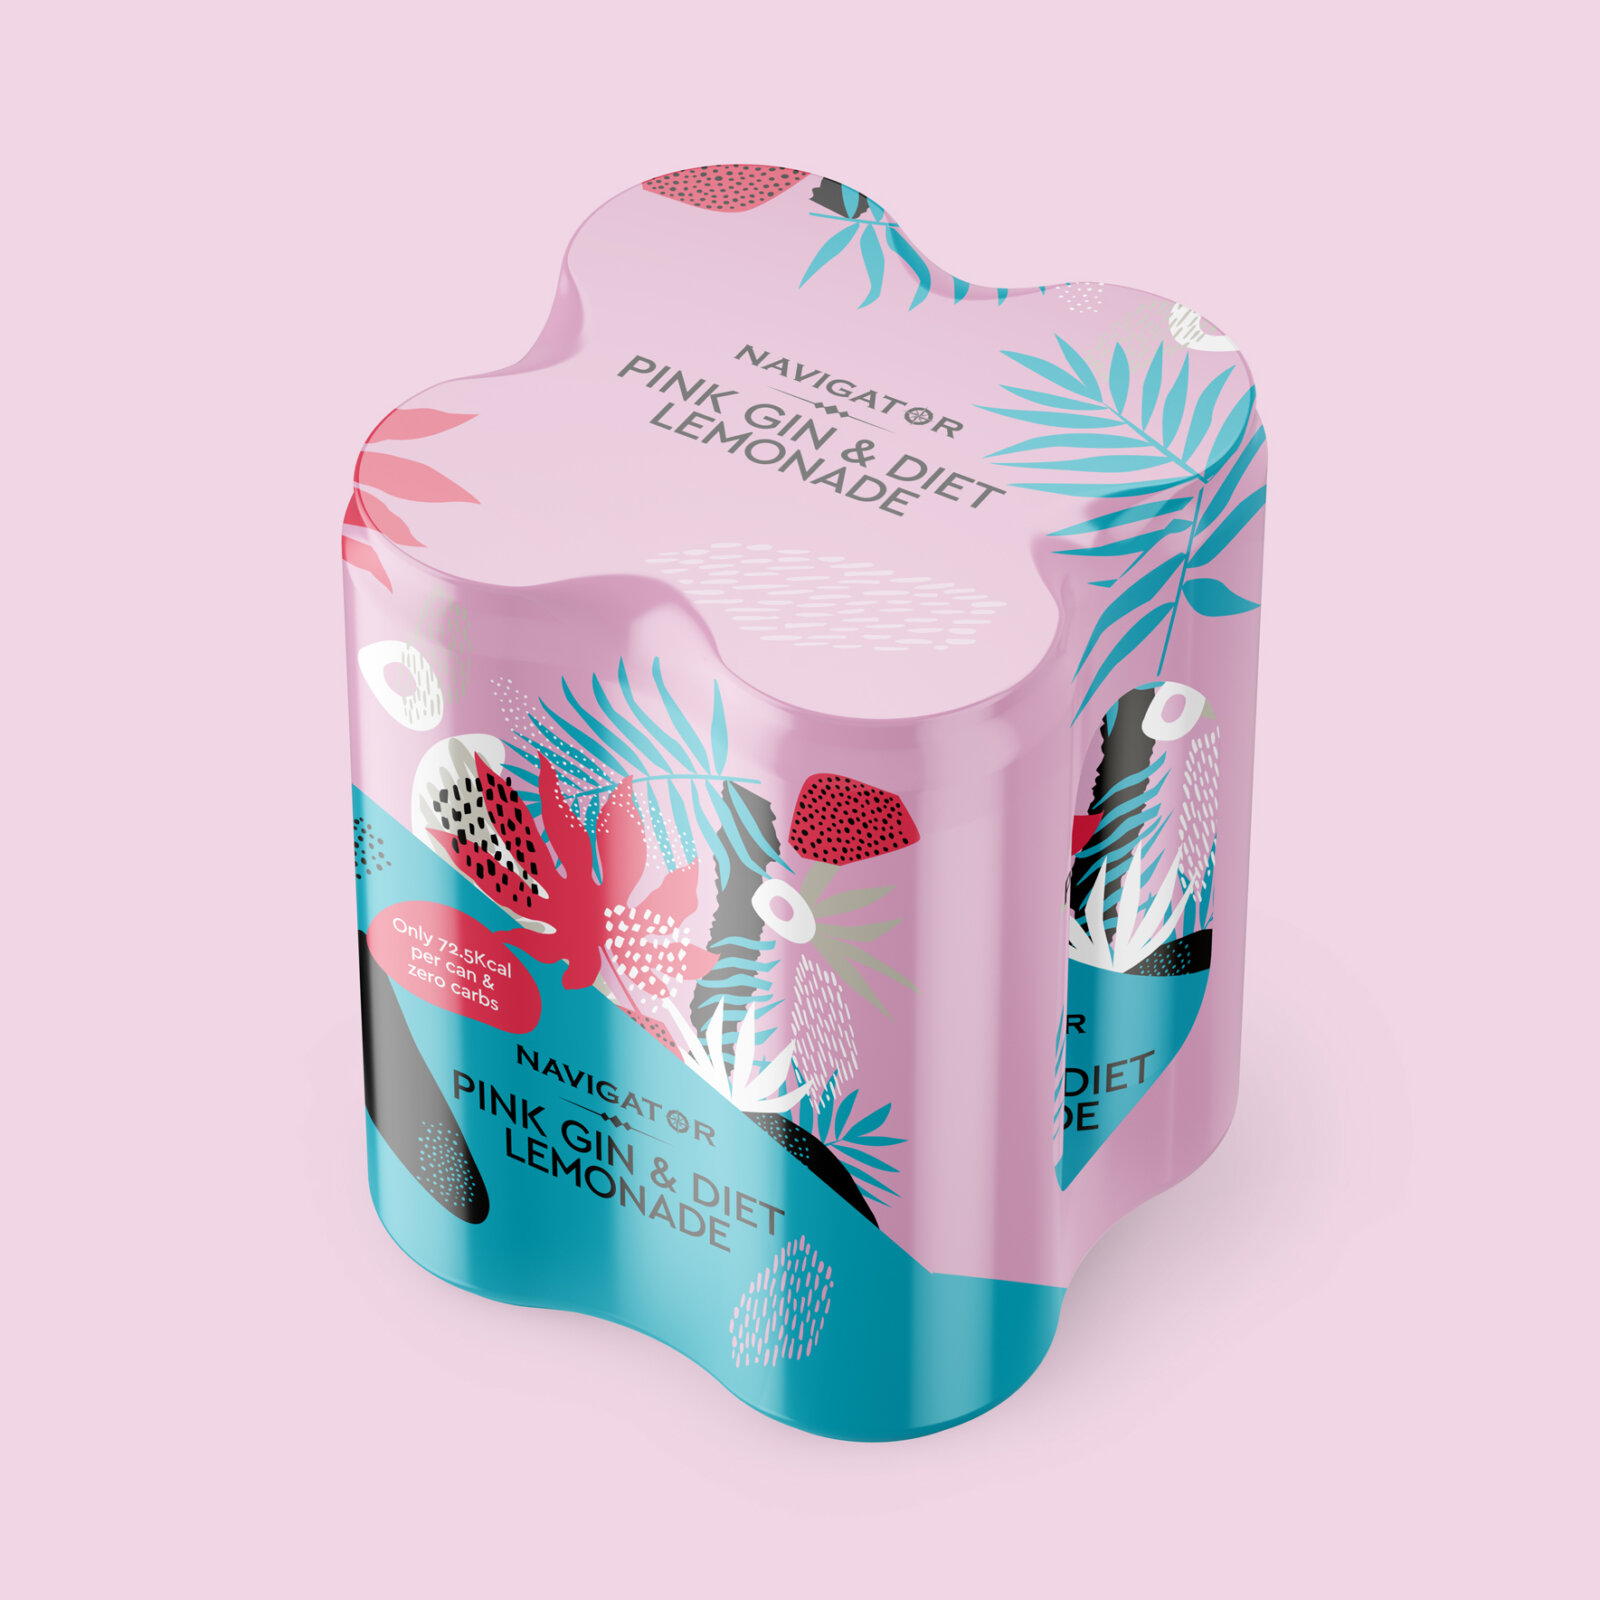 Manchester Drinks has launched summer cocktail multipack cans, The Manc